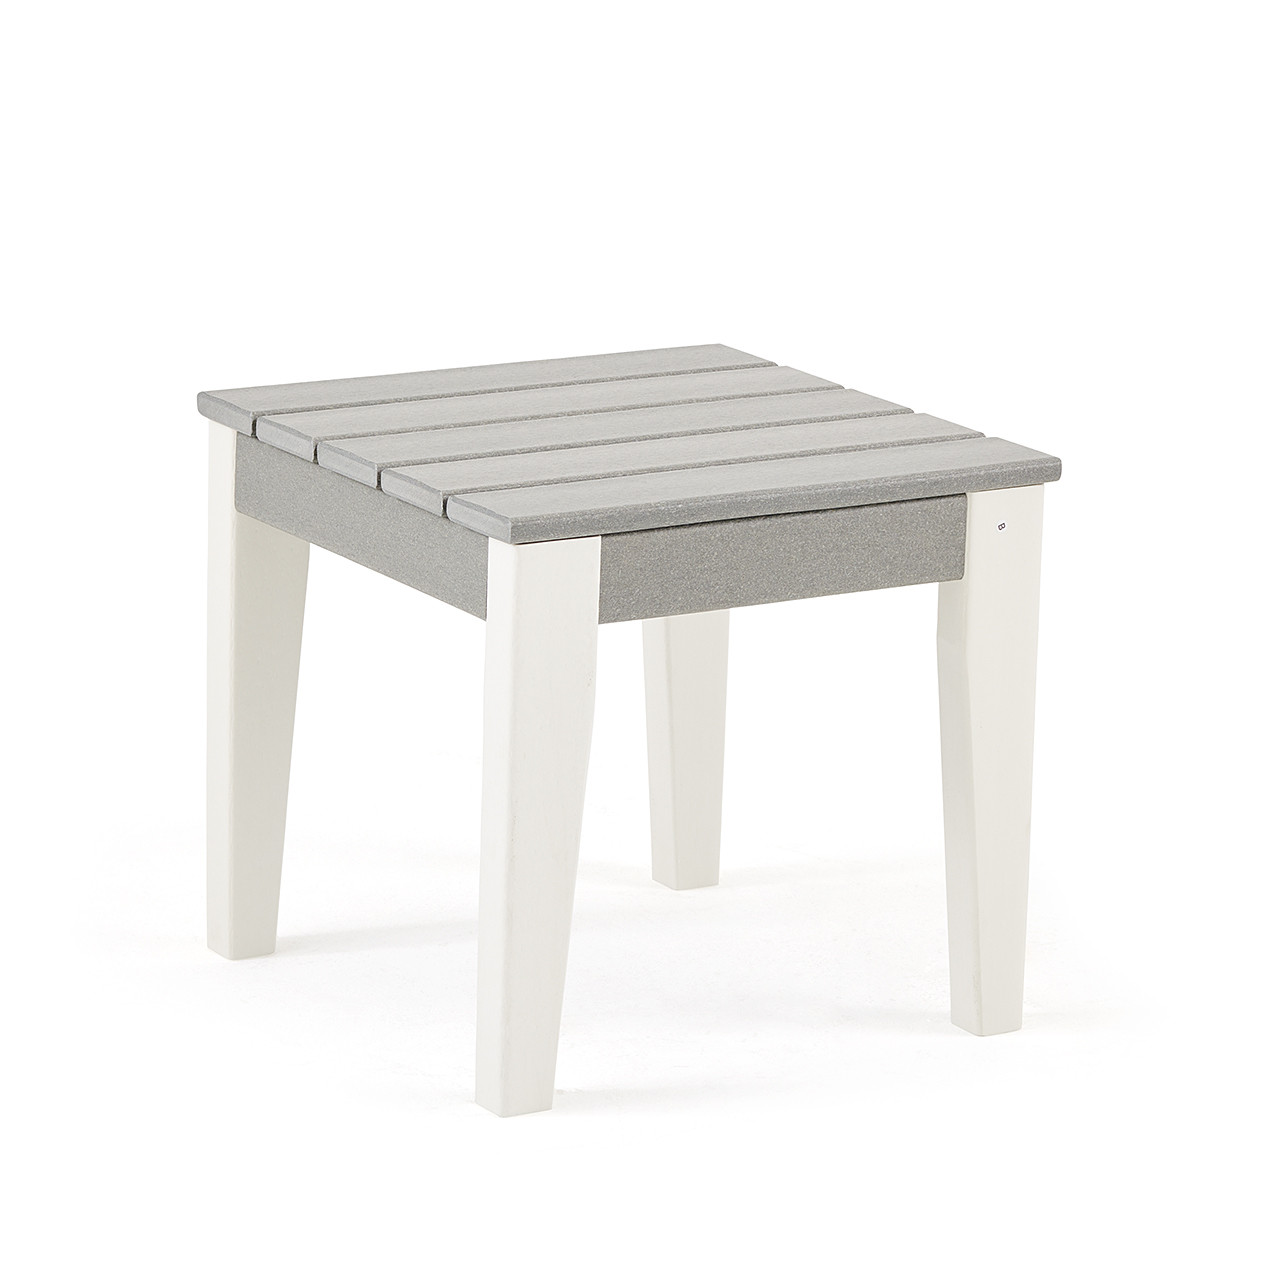 Farmhouse Polymer 18 in. Sq. Side Table